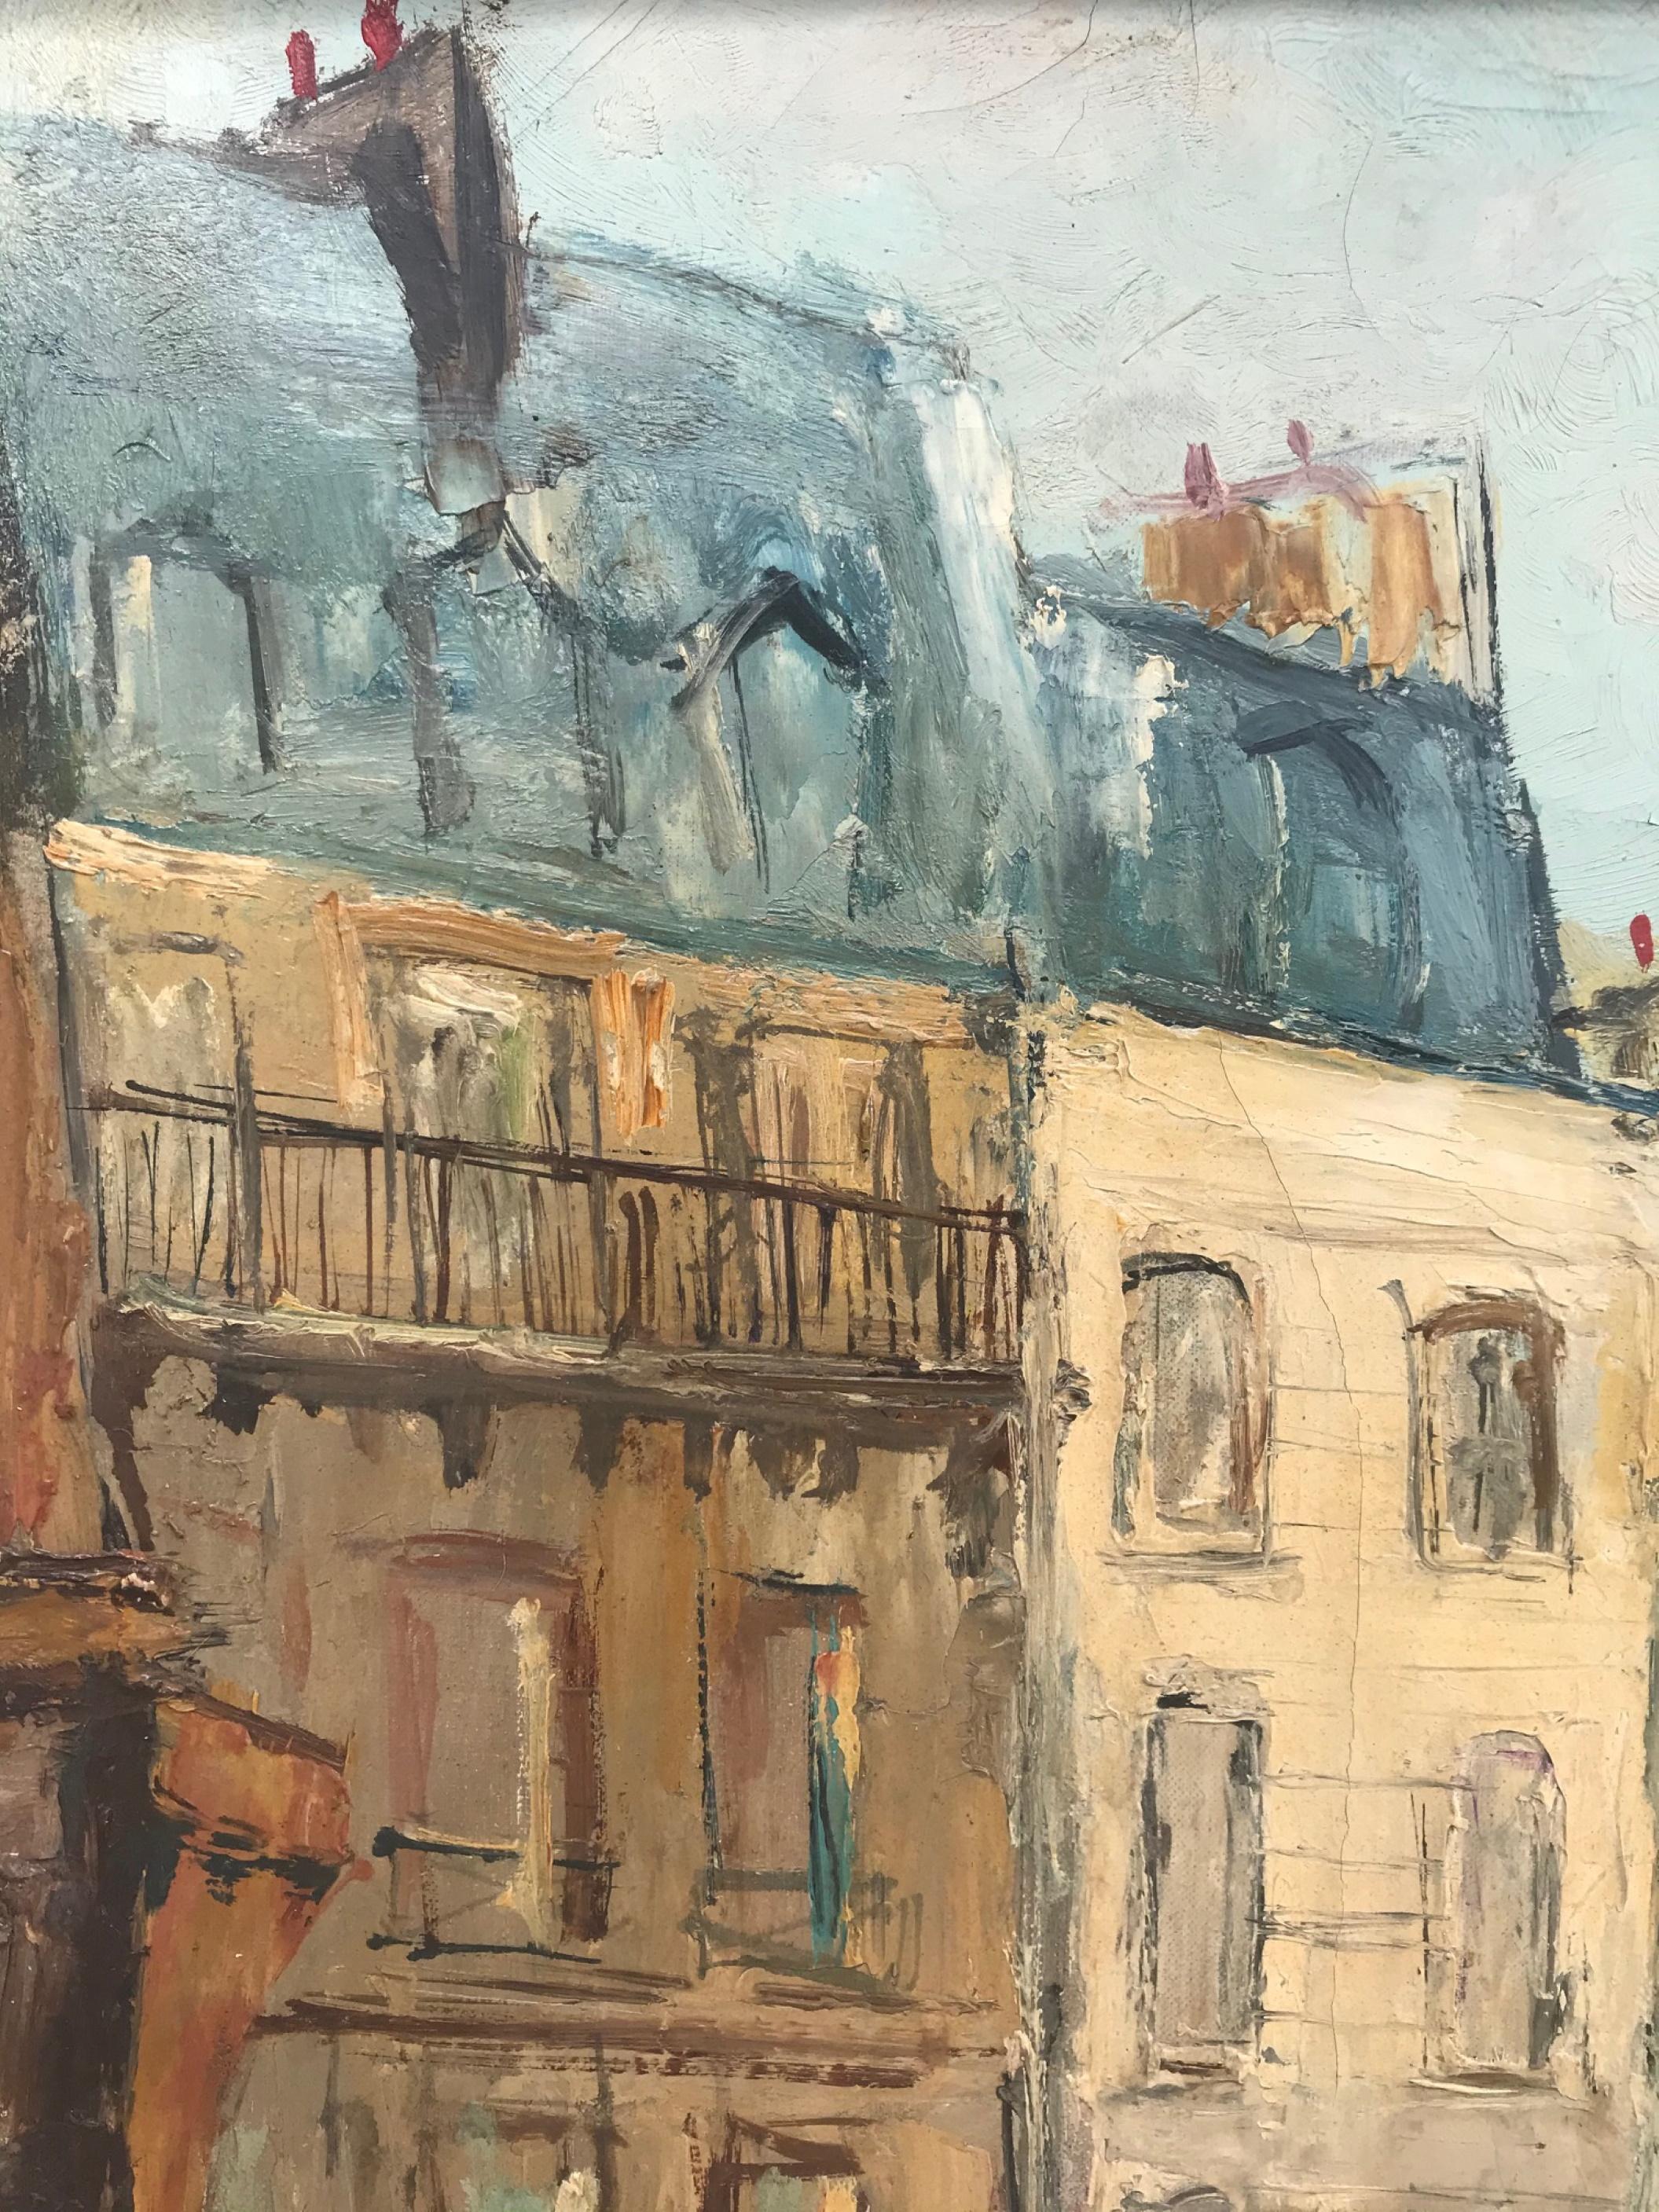 Parisian cityscape, signed and framed oil on canvas by Serge Belloni, ‘57

This painting has all the quintessential features of Belloni’s renowned Parisian works. The street corner painted features the architecture of the Boucherie Chevaline,